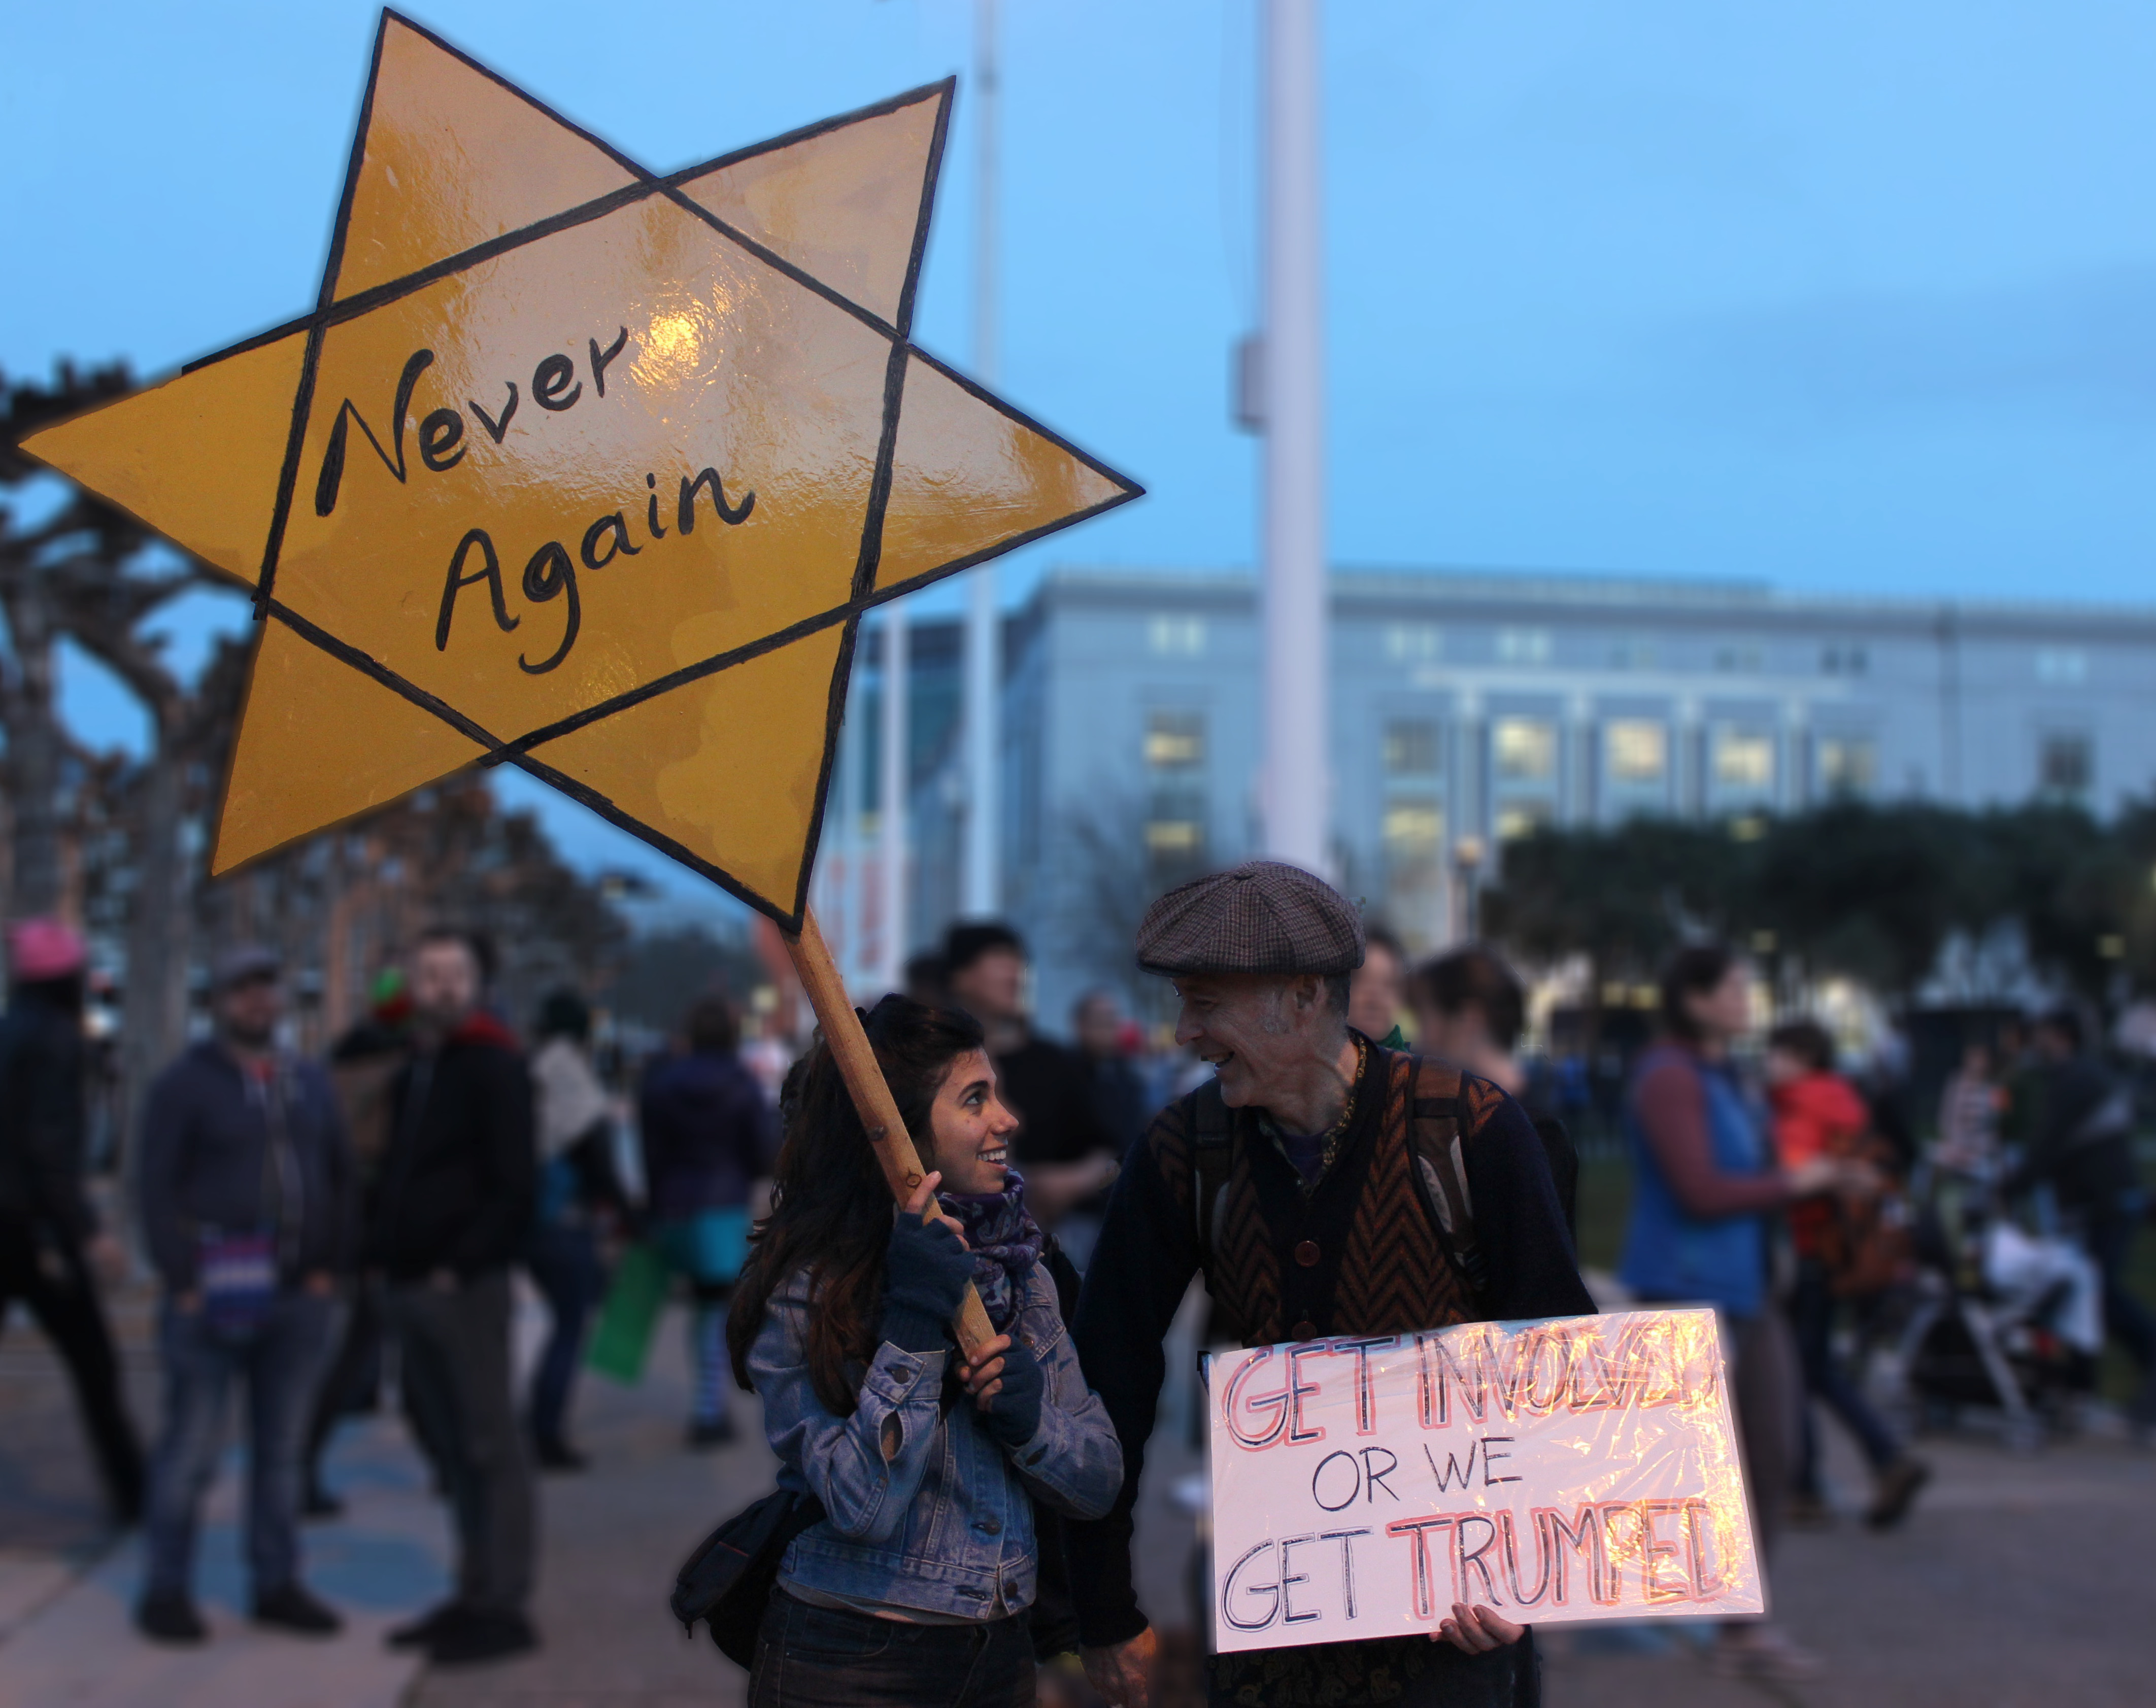 "What can we, as Jewish student activists, do to affect change?" | By Jackson Block